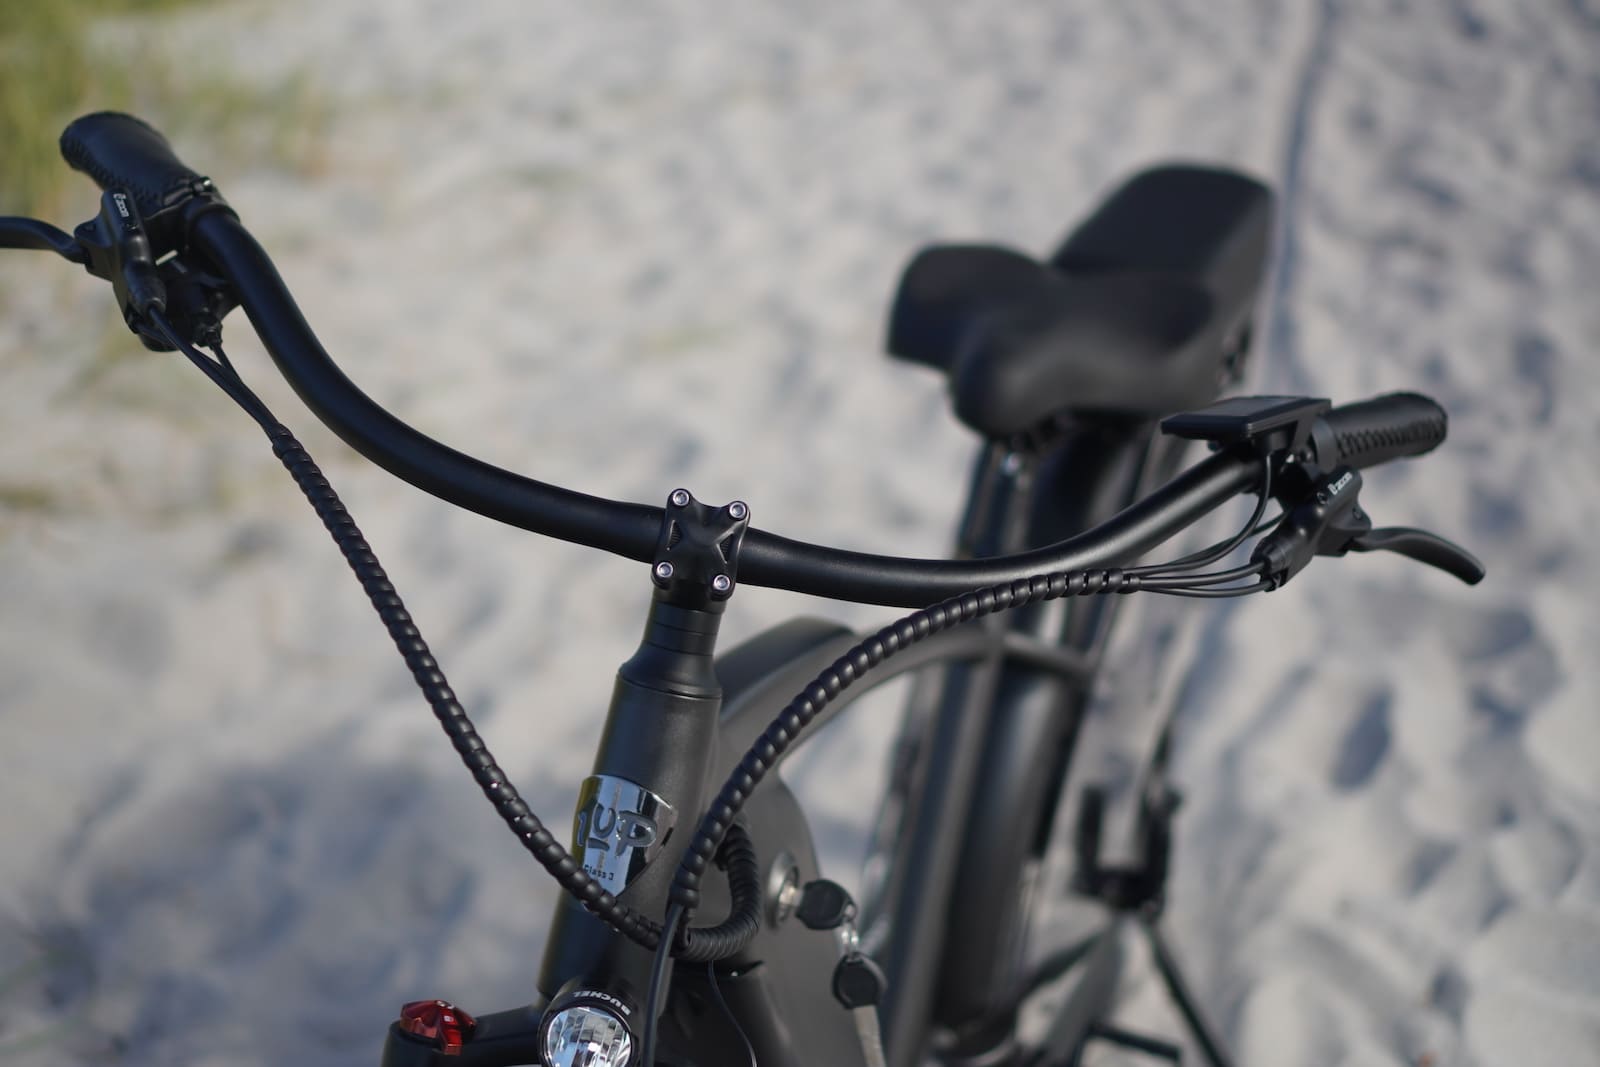 Ride1Up Cafe Cruiser 28 mph electric bike review: Comfort for two riders!